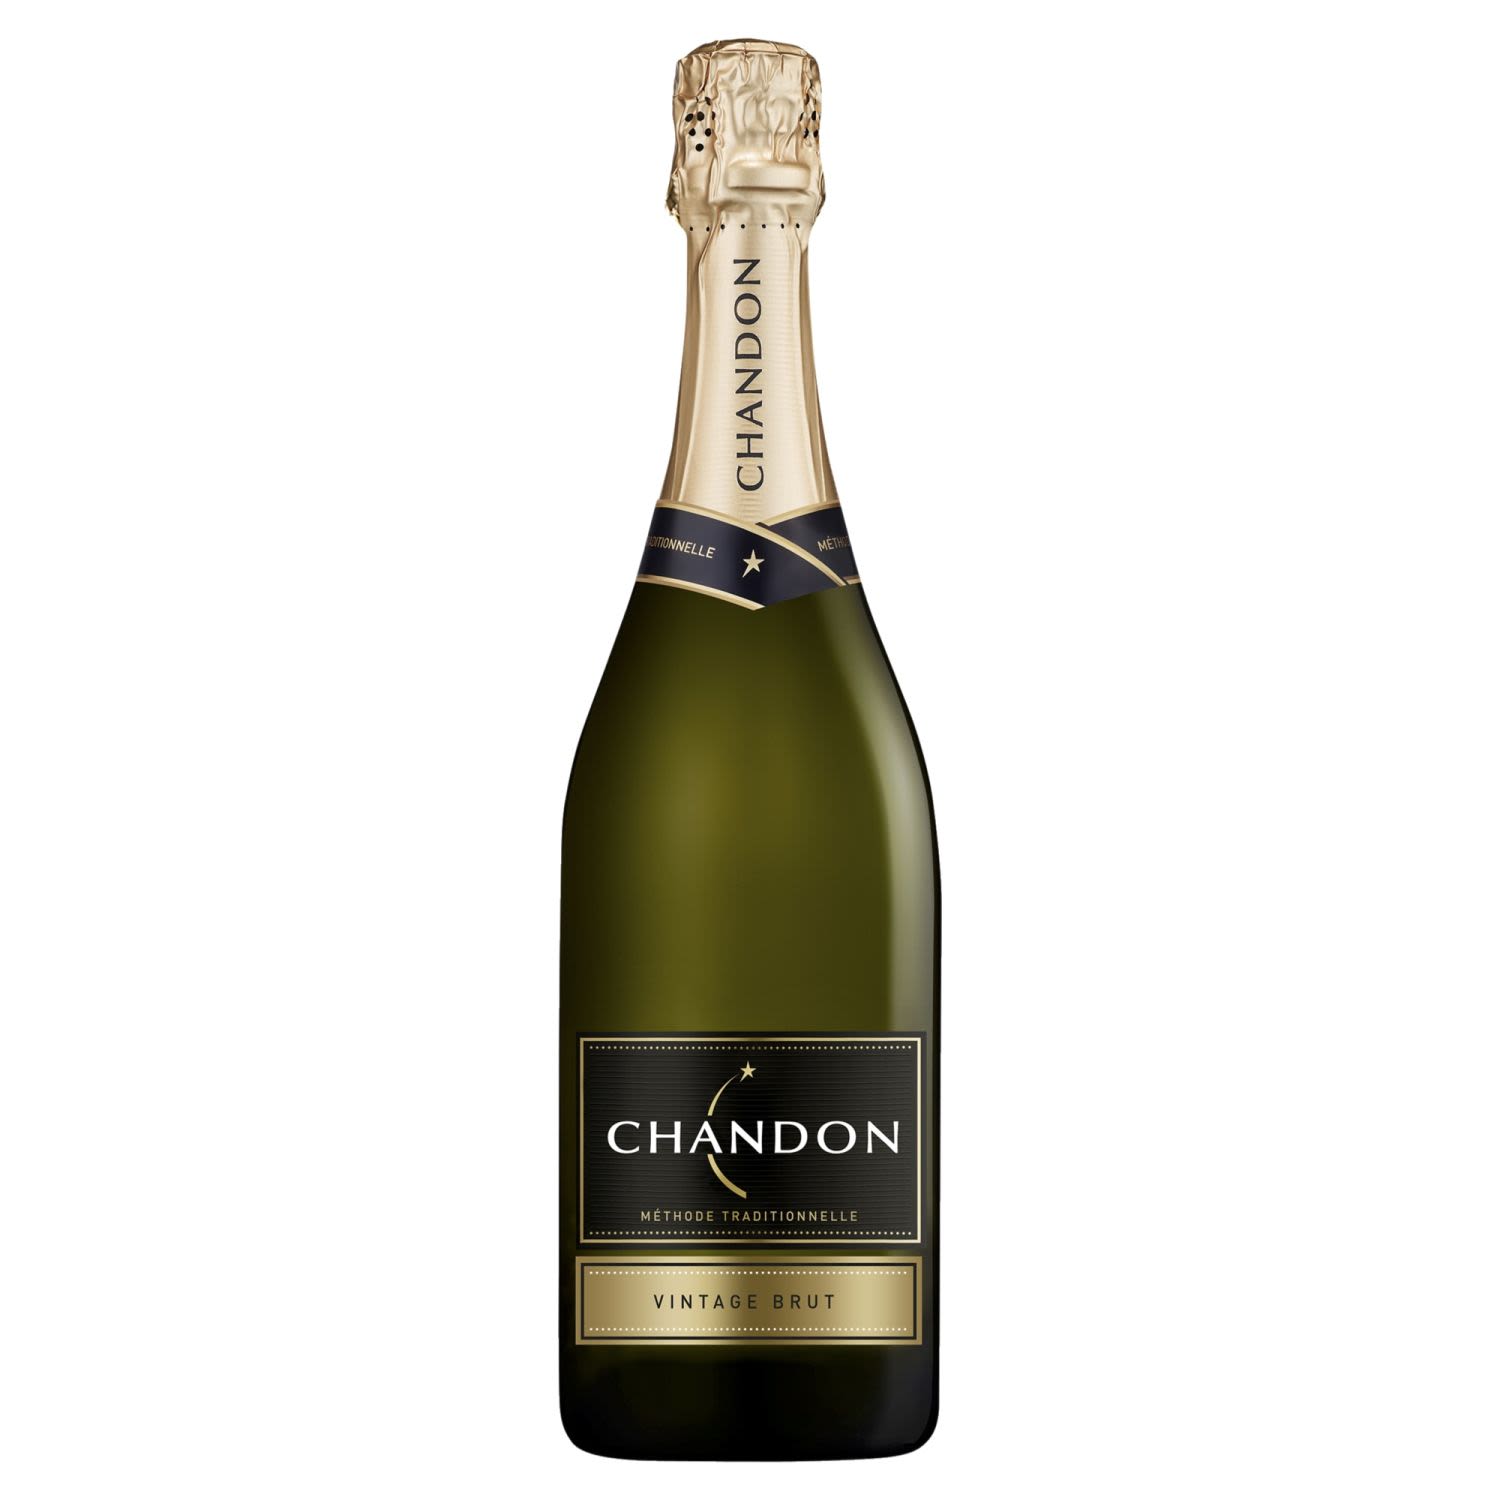 This is Chandon's original and benchmark methode traditionnelle sparkling wine made from grapes harvested from some of Victoria's finest cool-climate sites. Chandon Australia established themselves with this very wine. Made from Chardonnay, Pinot Noir and Pinot Meunier and entirely bottle conditioned in the classical Champagne method, this is rich, powerful and complex with baked bread, brioche, vanilla and citrus tang leading to a long, clean and satidfying finish.<br /> <br />Alcohol Volume: 12.50%<br /><br />Pack Format: Bottle<br /><br />Standard Drinks: 7.7</br /><br />Pack Type: Bottle<br /><br />Country of Origin: Australia<br /><br />Region: Yarra Valley<br /><br />Vintage: Vintages Vary<br />